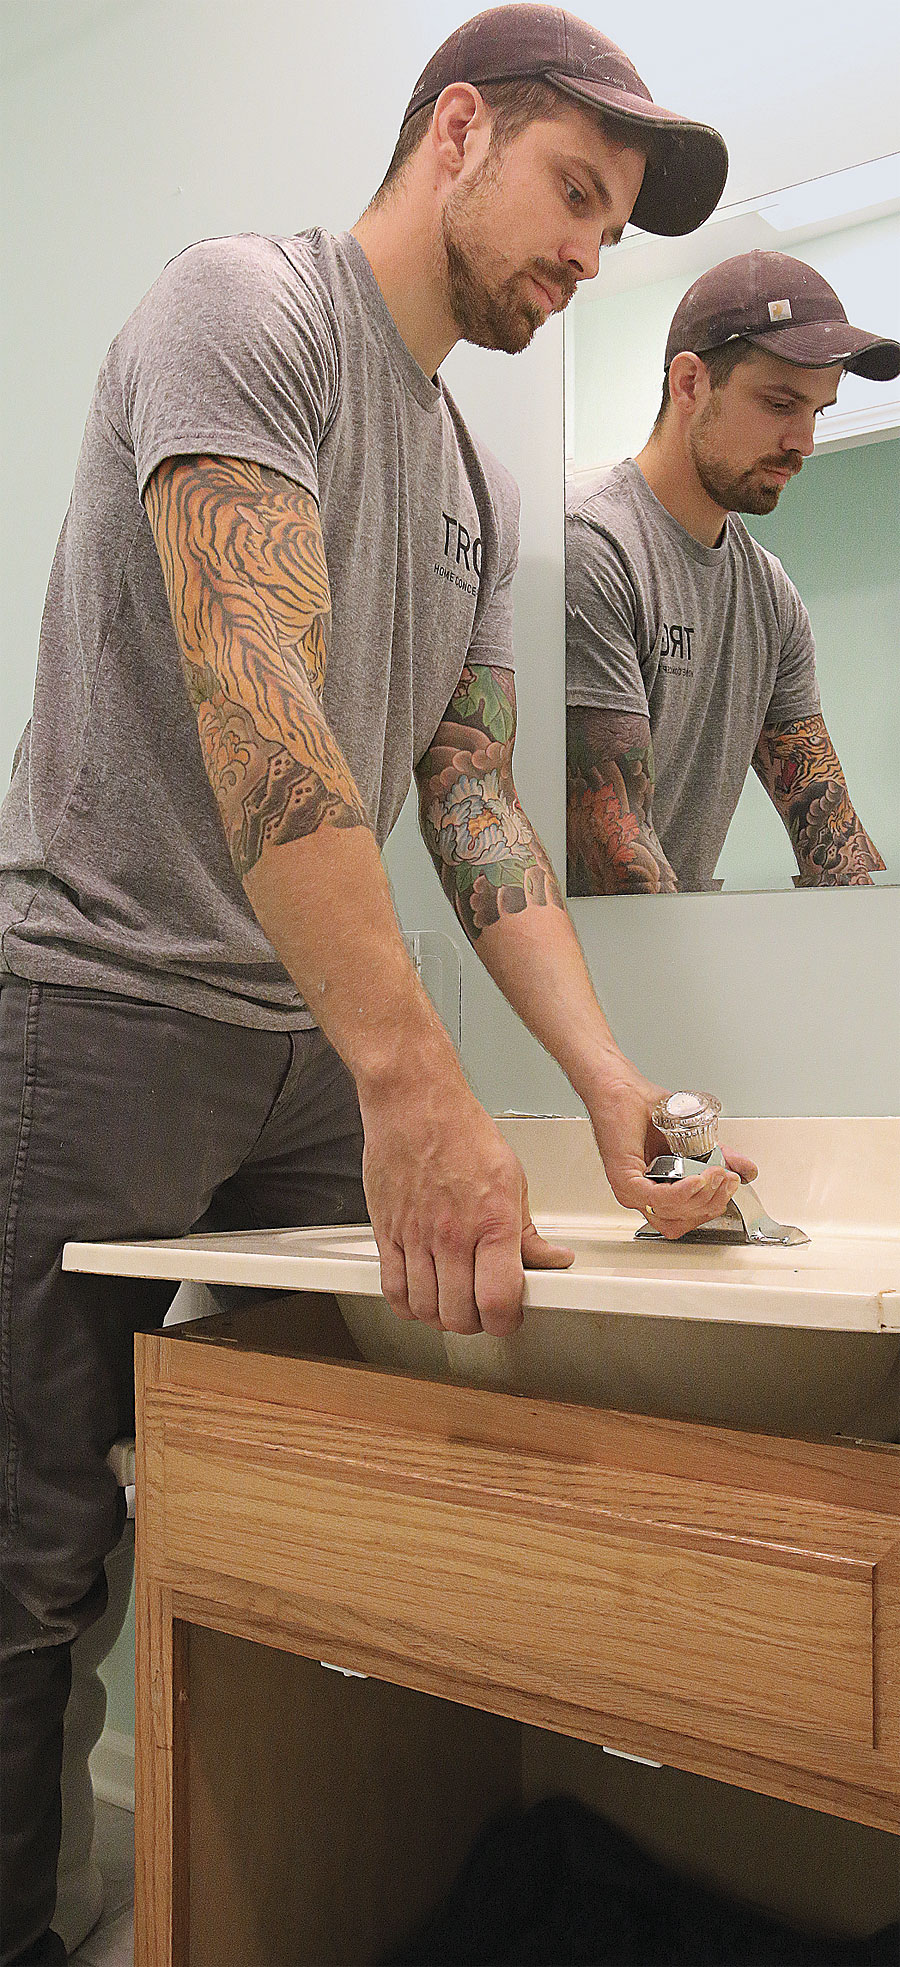 Installing a Vanity with Drawers - Fine Homebuilding